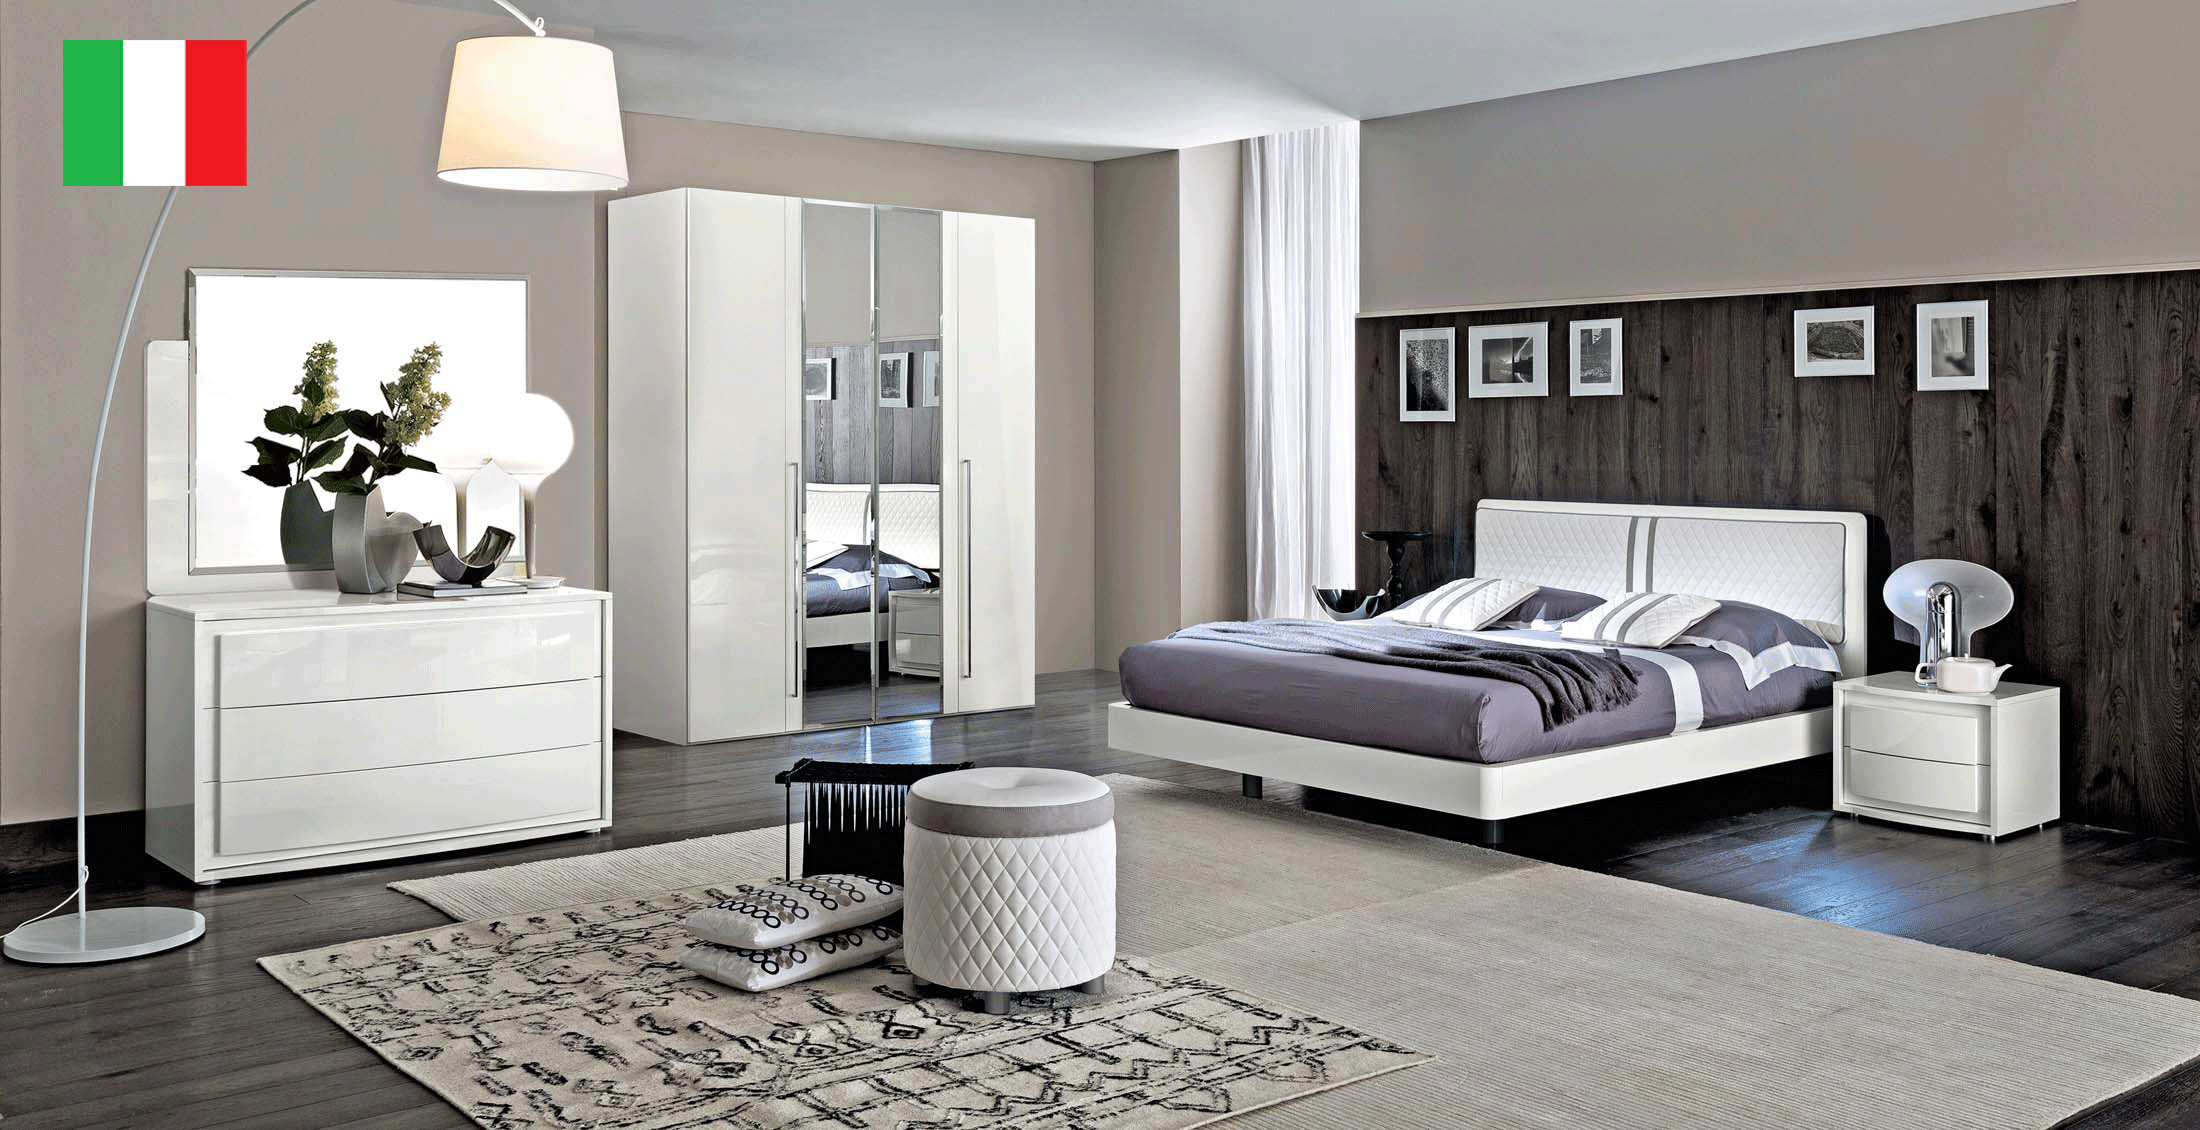 Brands Dupen Mattresses and Frames, Spain Dama Bianca Bedroom by CamelGroup Italy